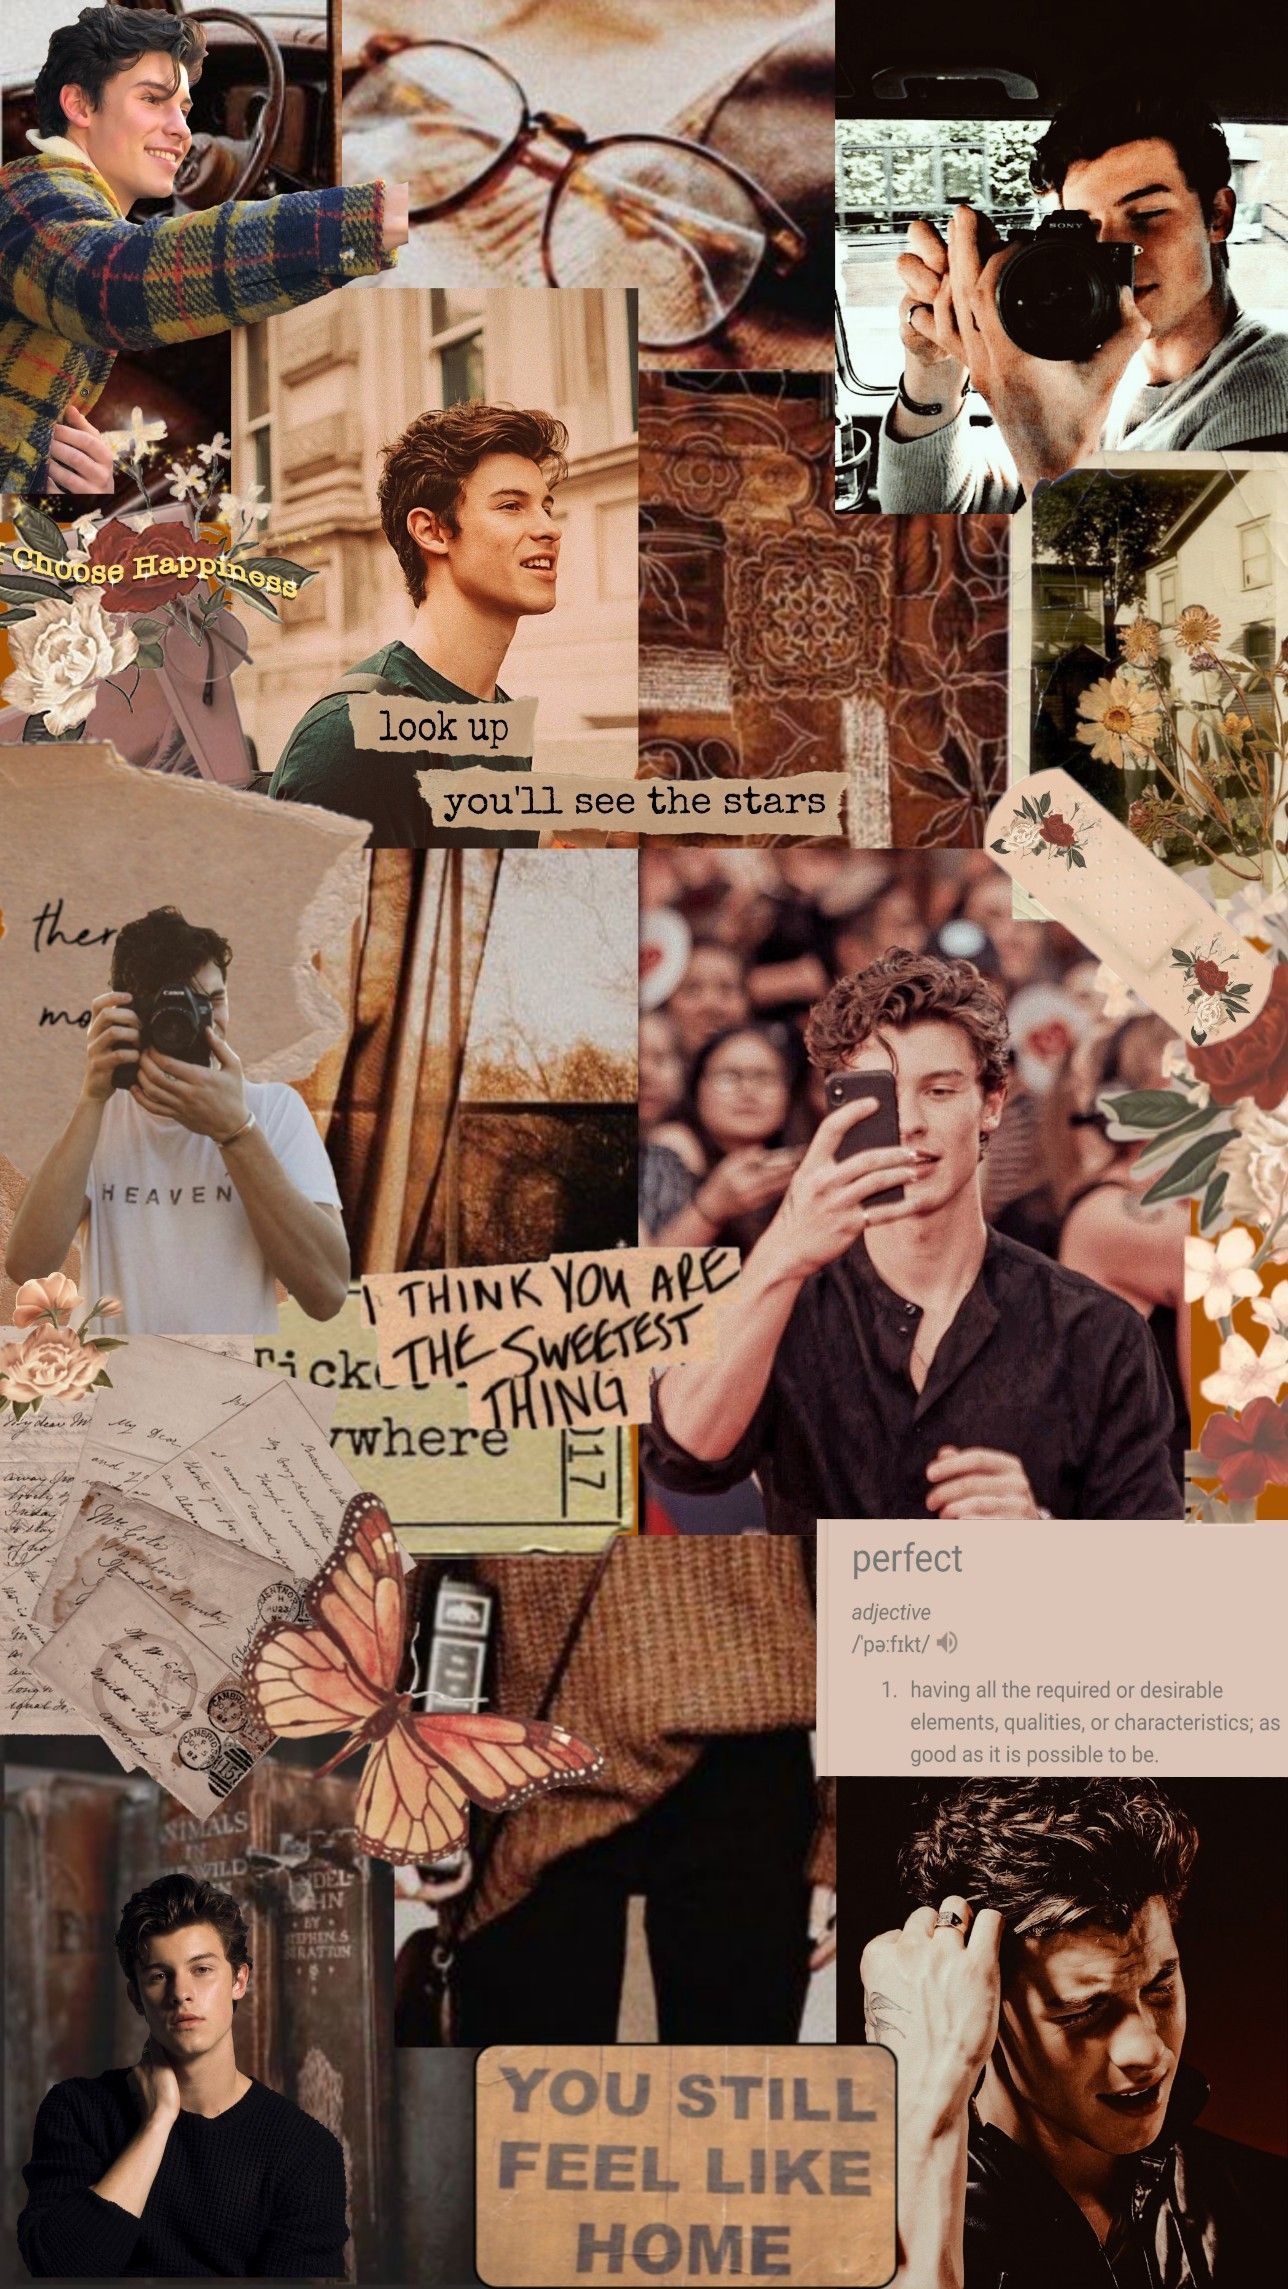 Shawn Mendes Wallpaper. Shawn mendes songs, Shawn mendes wallpaper, Shawn mendes cute